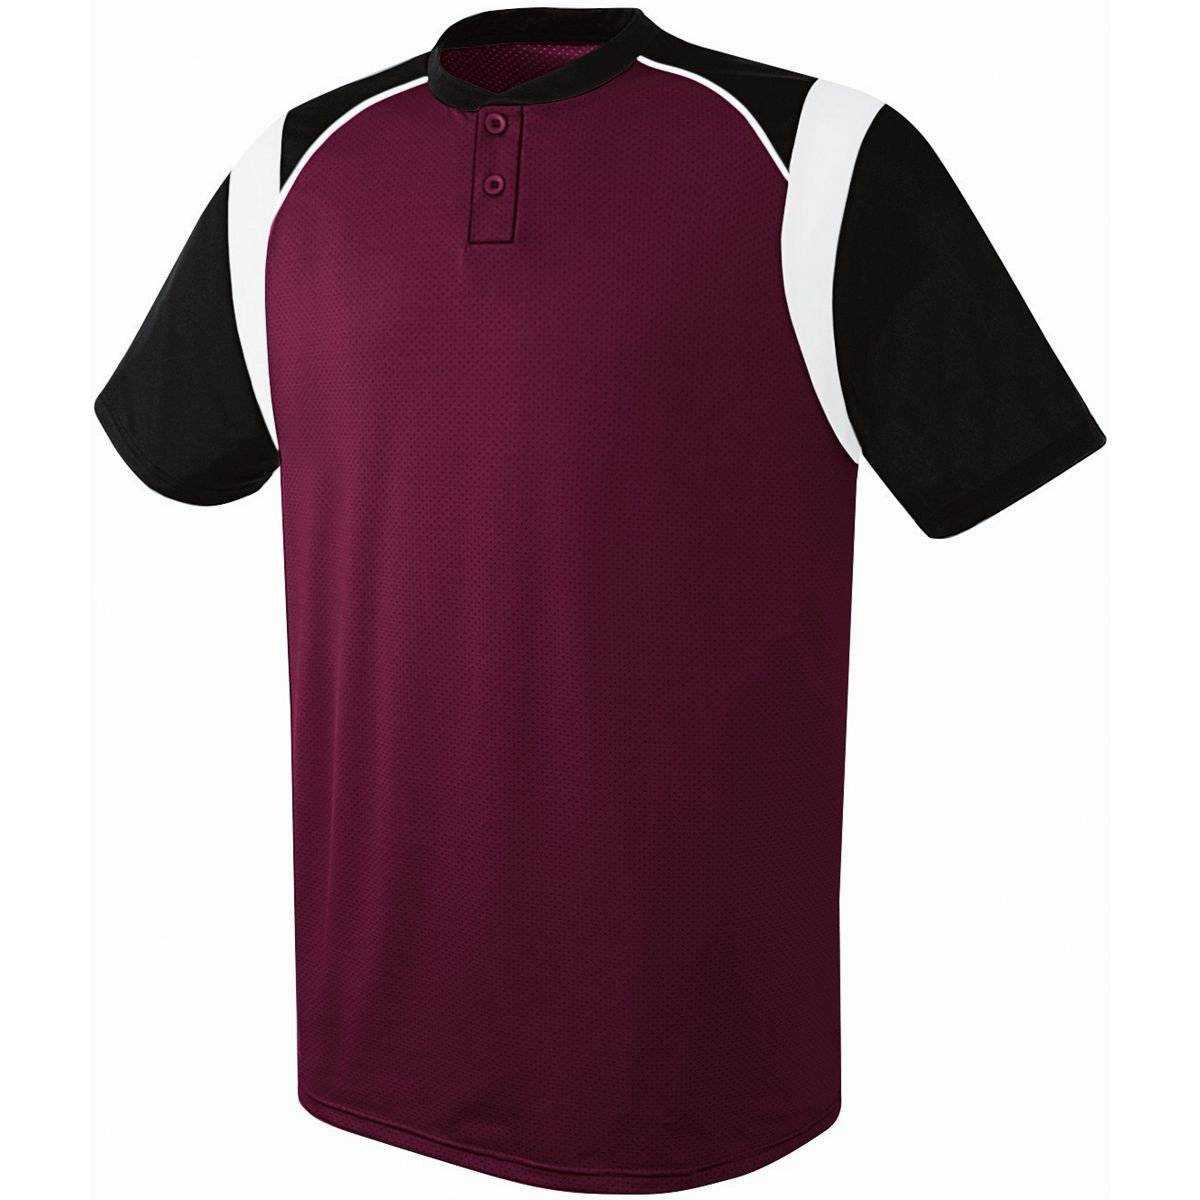 High Five 312200 Adult Wildcard 2 Button Jersey - Maroon Black White - HIT a Double